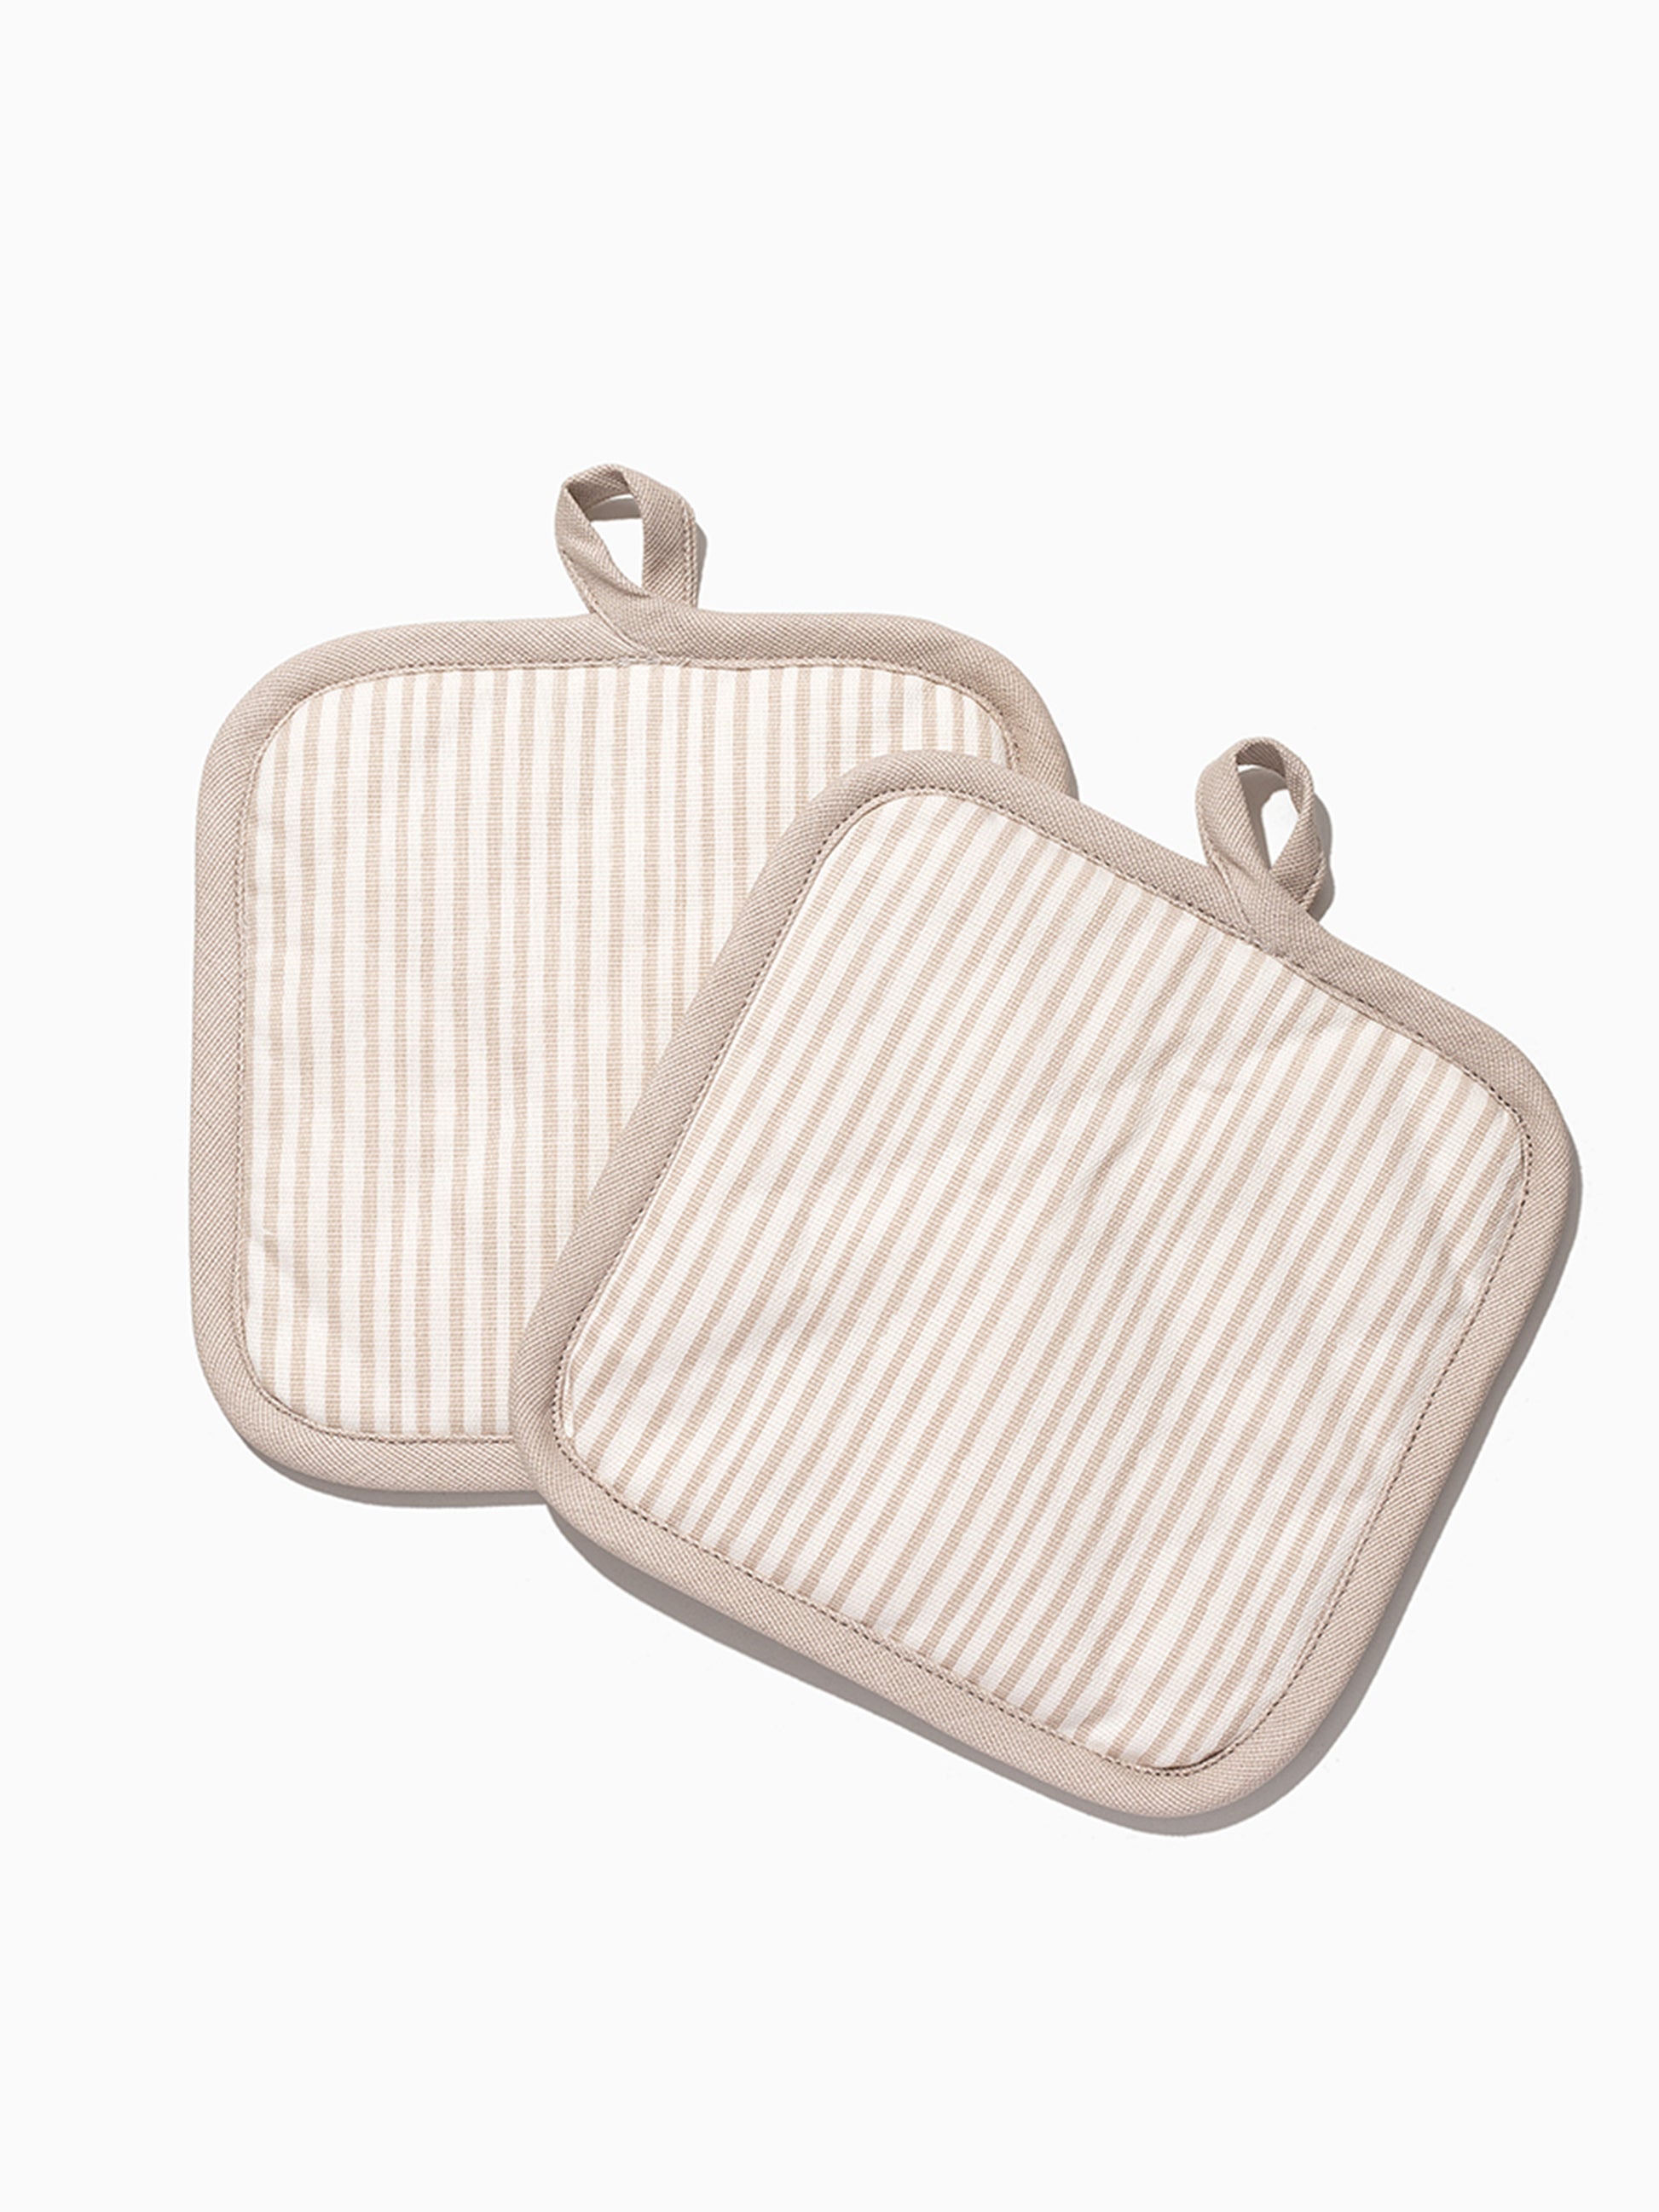 Tan Striped Pot Holder (Set of 2) | Product Image | Uncommon Lifestyle